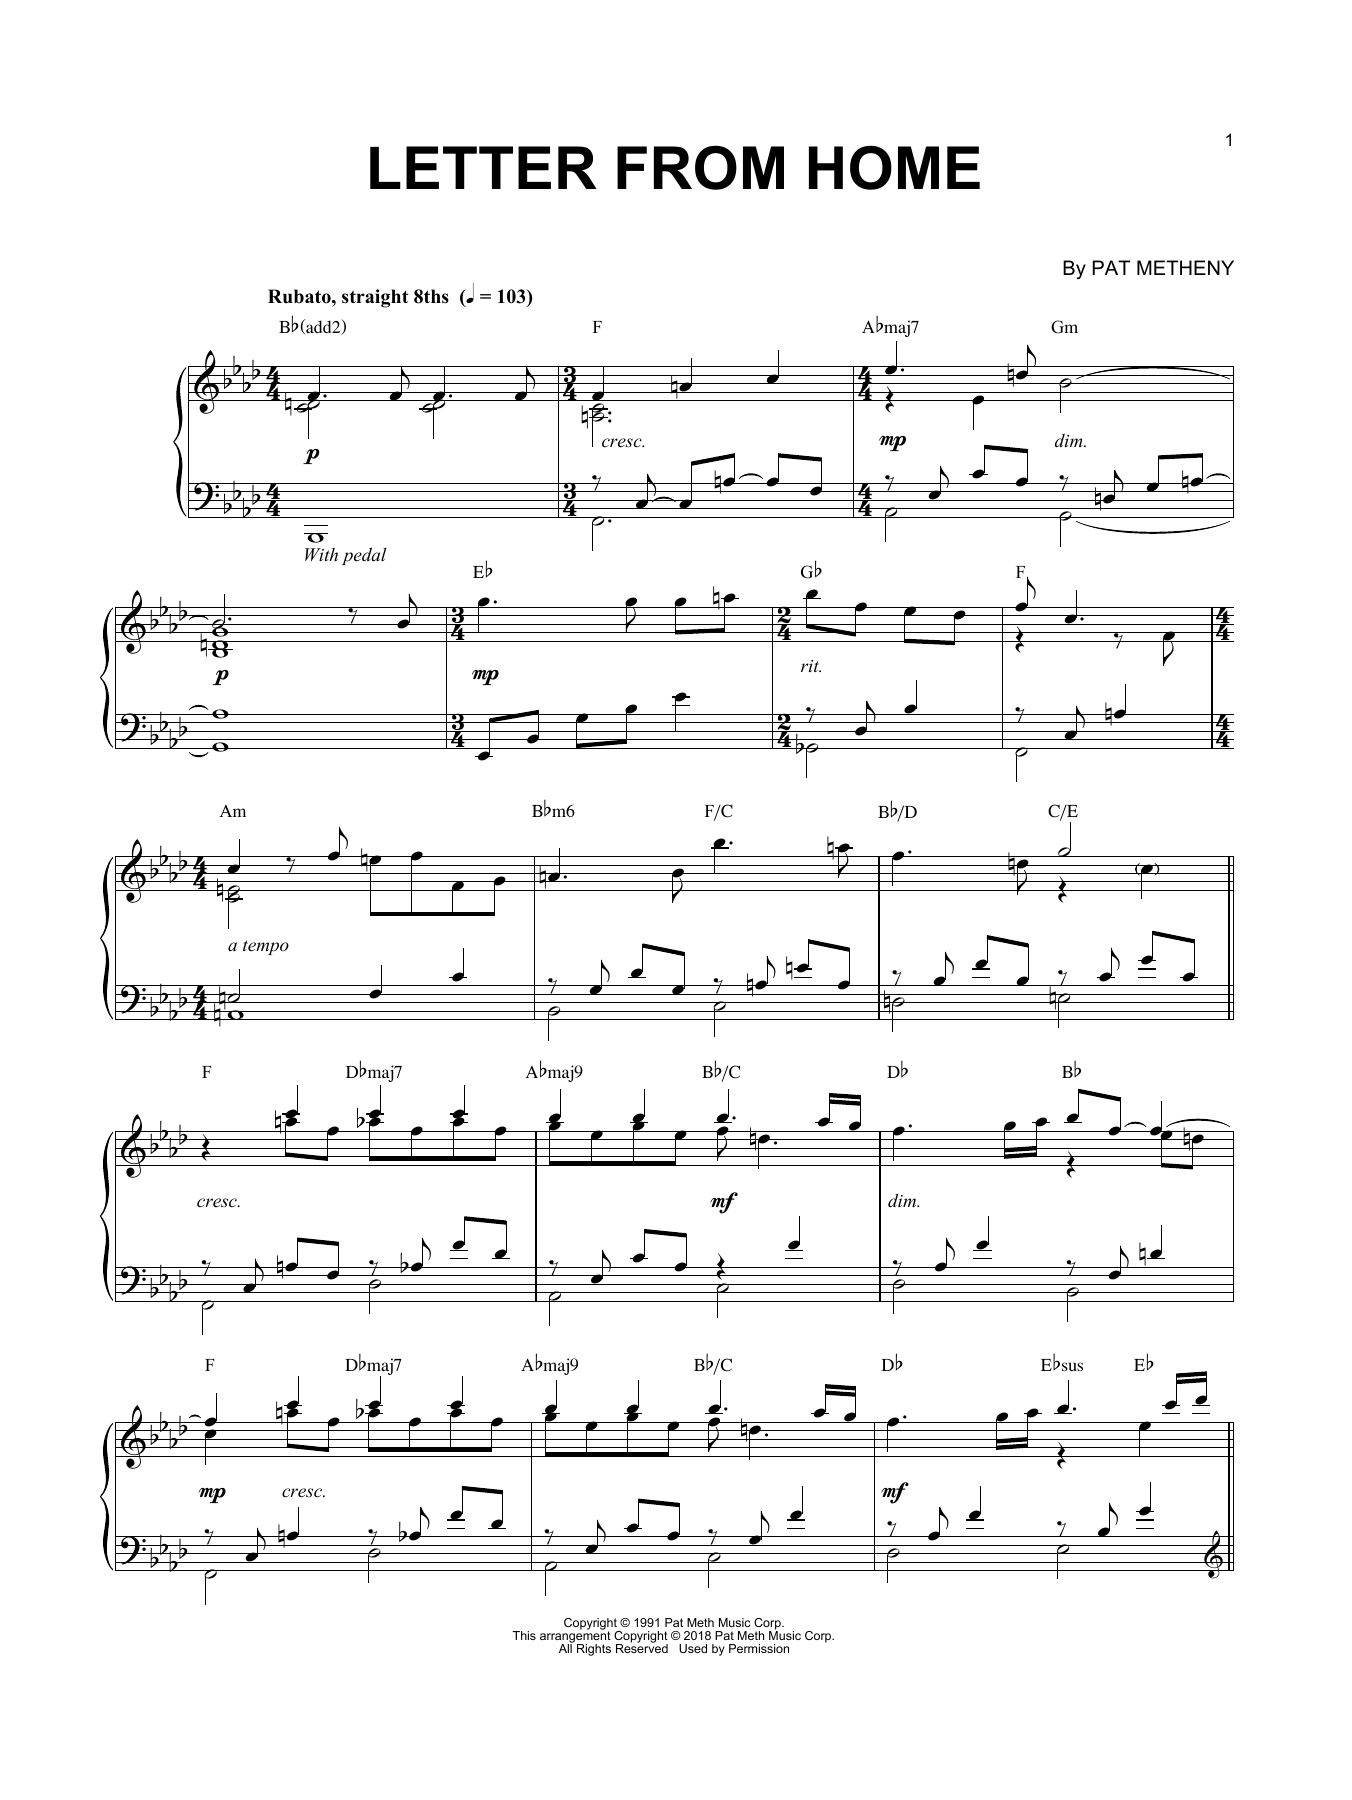 Download Pat Metheny Letter From Home Sheet Music